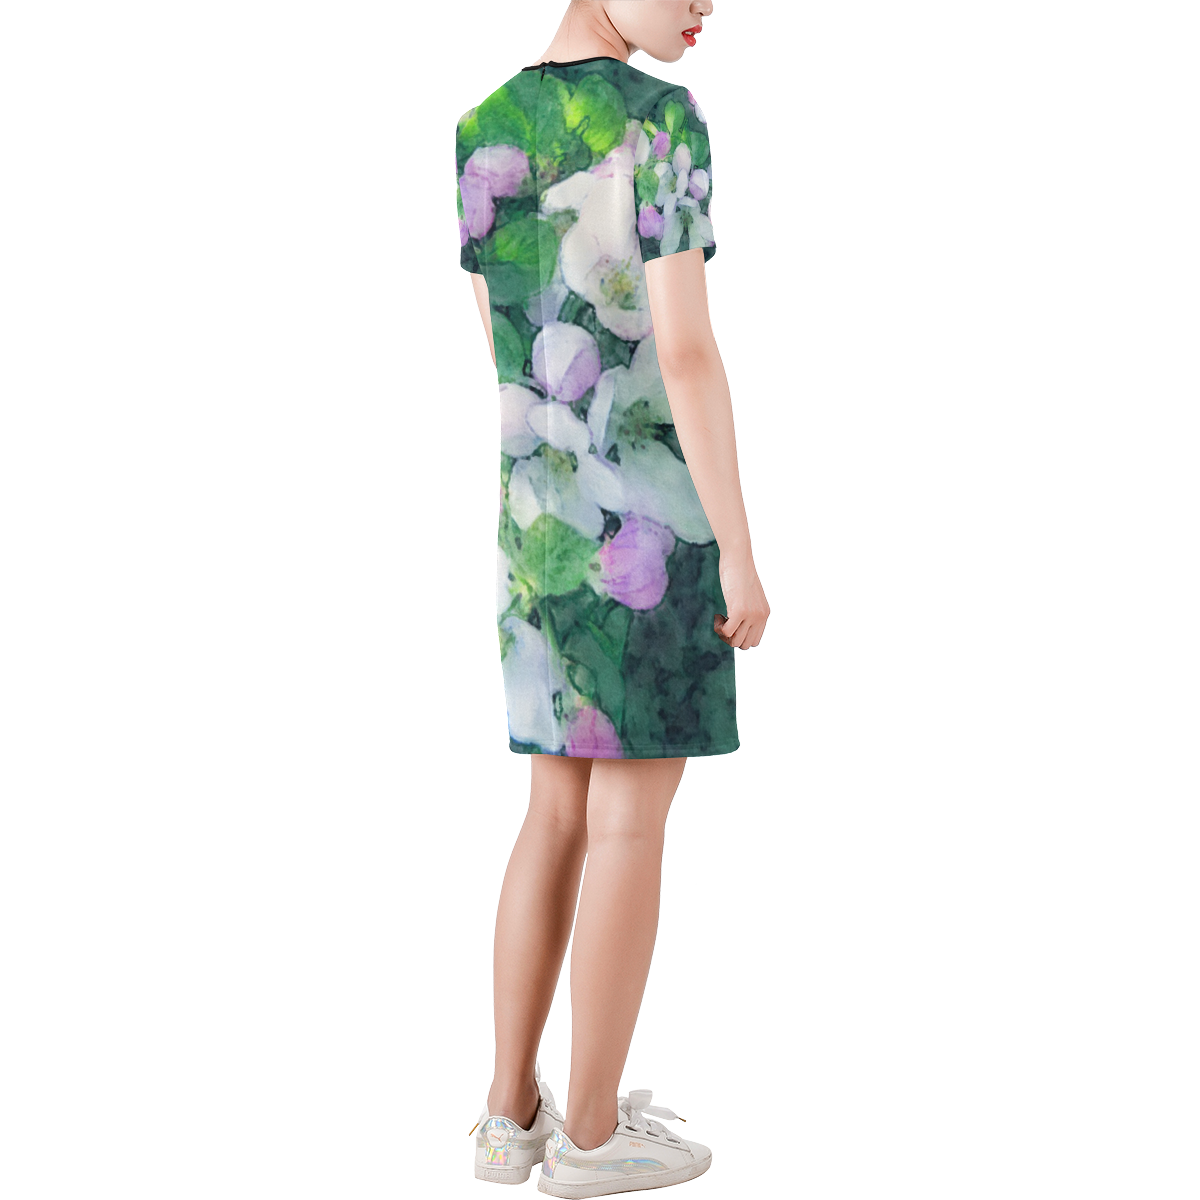 Apple Blossom. Inspired by the Magic Island of Gotland. Short-Sleeve Round Neck A-Line Dress (Model D47)